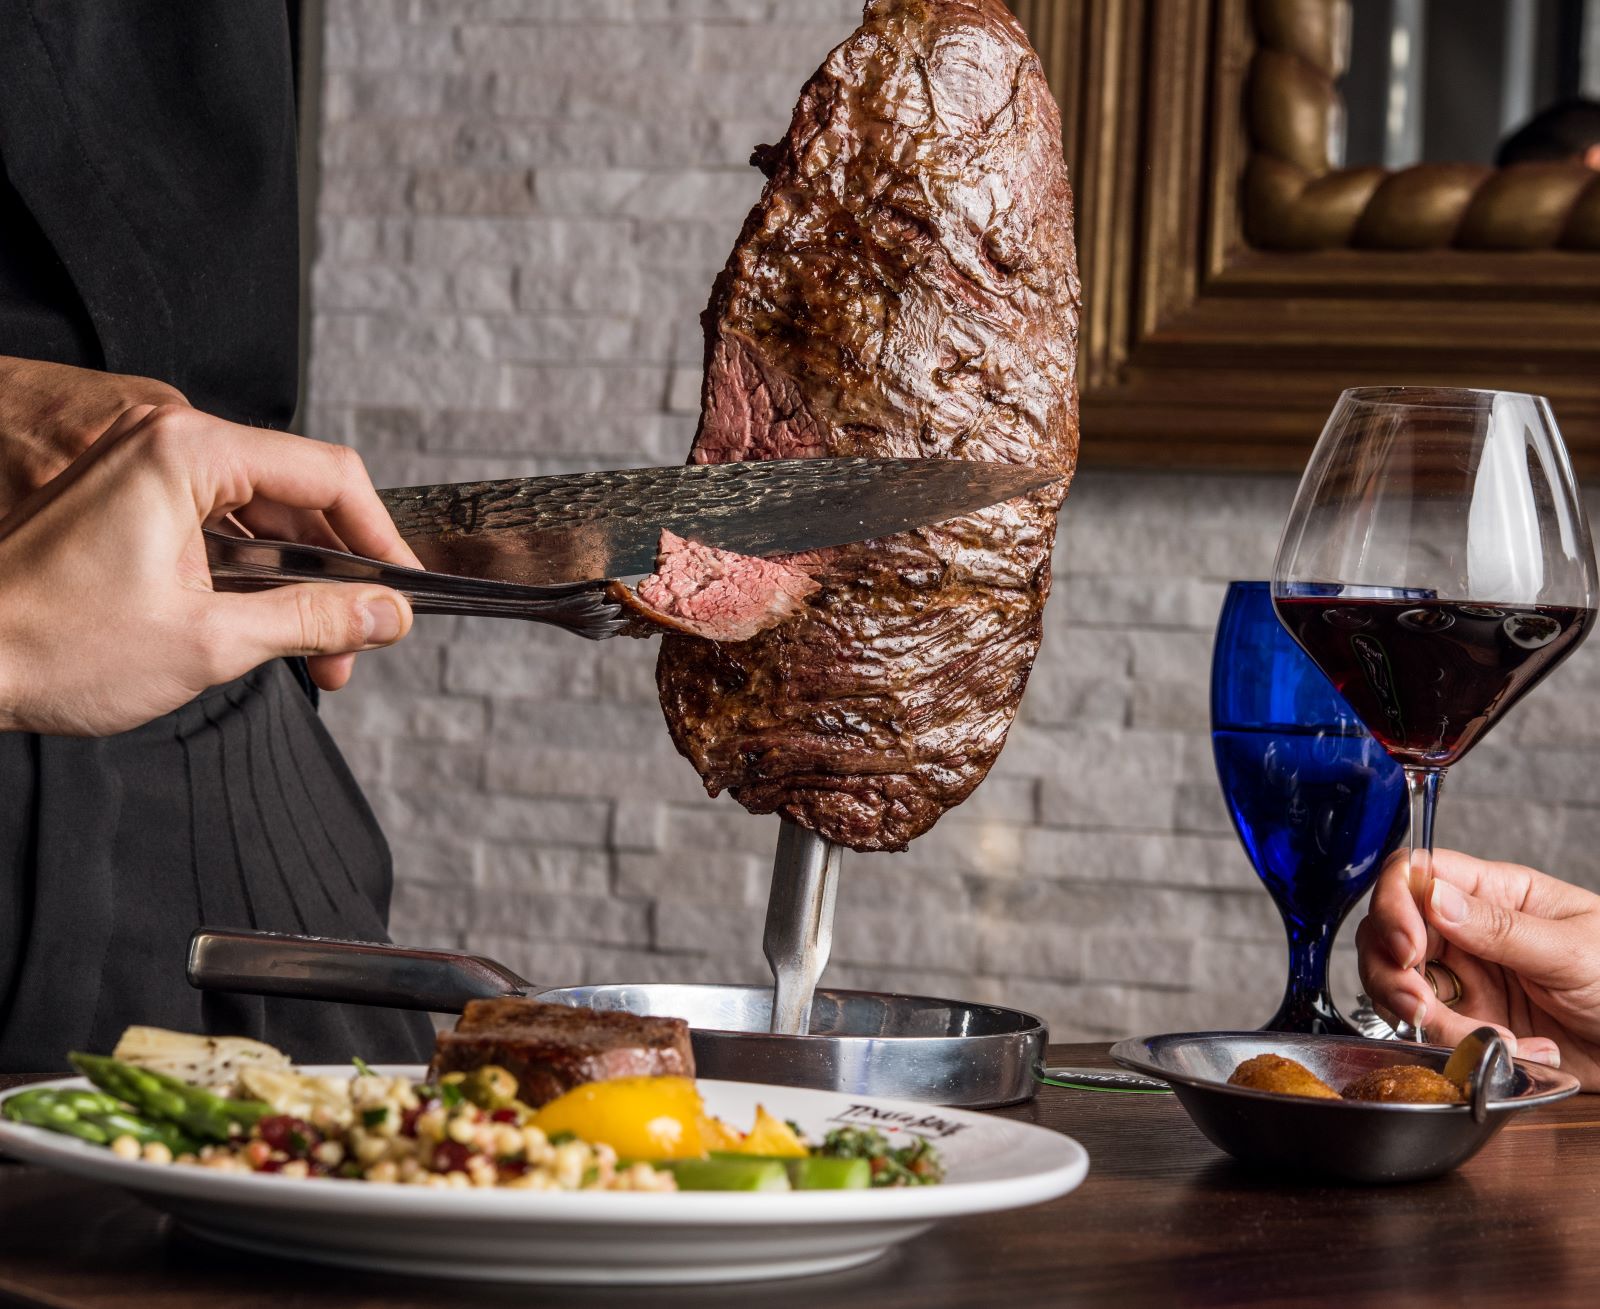 Enjoy continuous servings of meat, carved table-side by the restaurant gauchos.